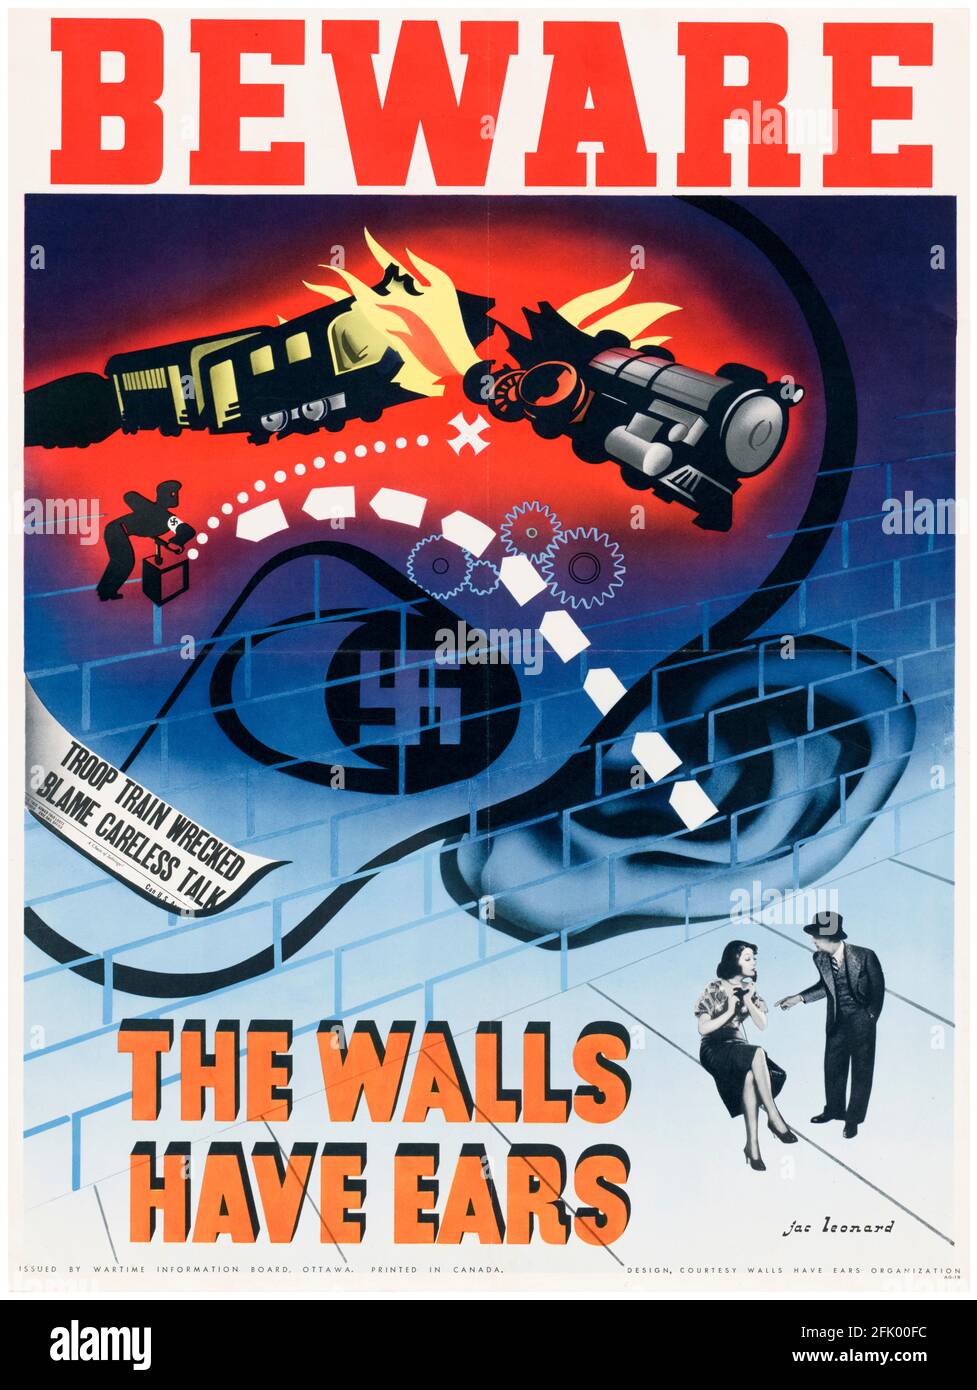 Beware: The Walls Have Ears, American, Careless Talk, WW2 Public Information Poster, 1942-1945 Stock Photo